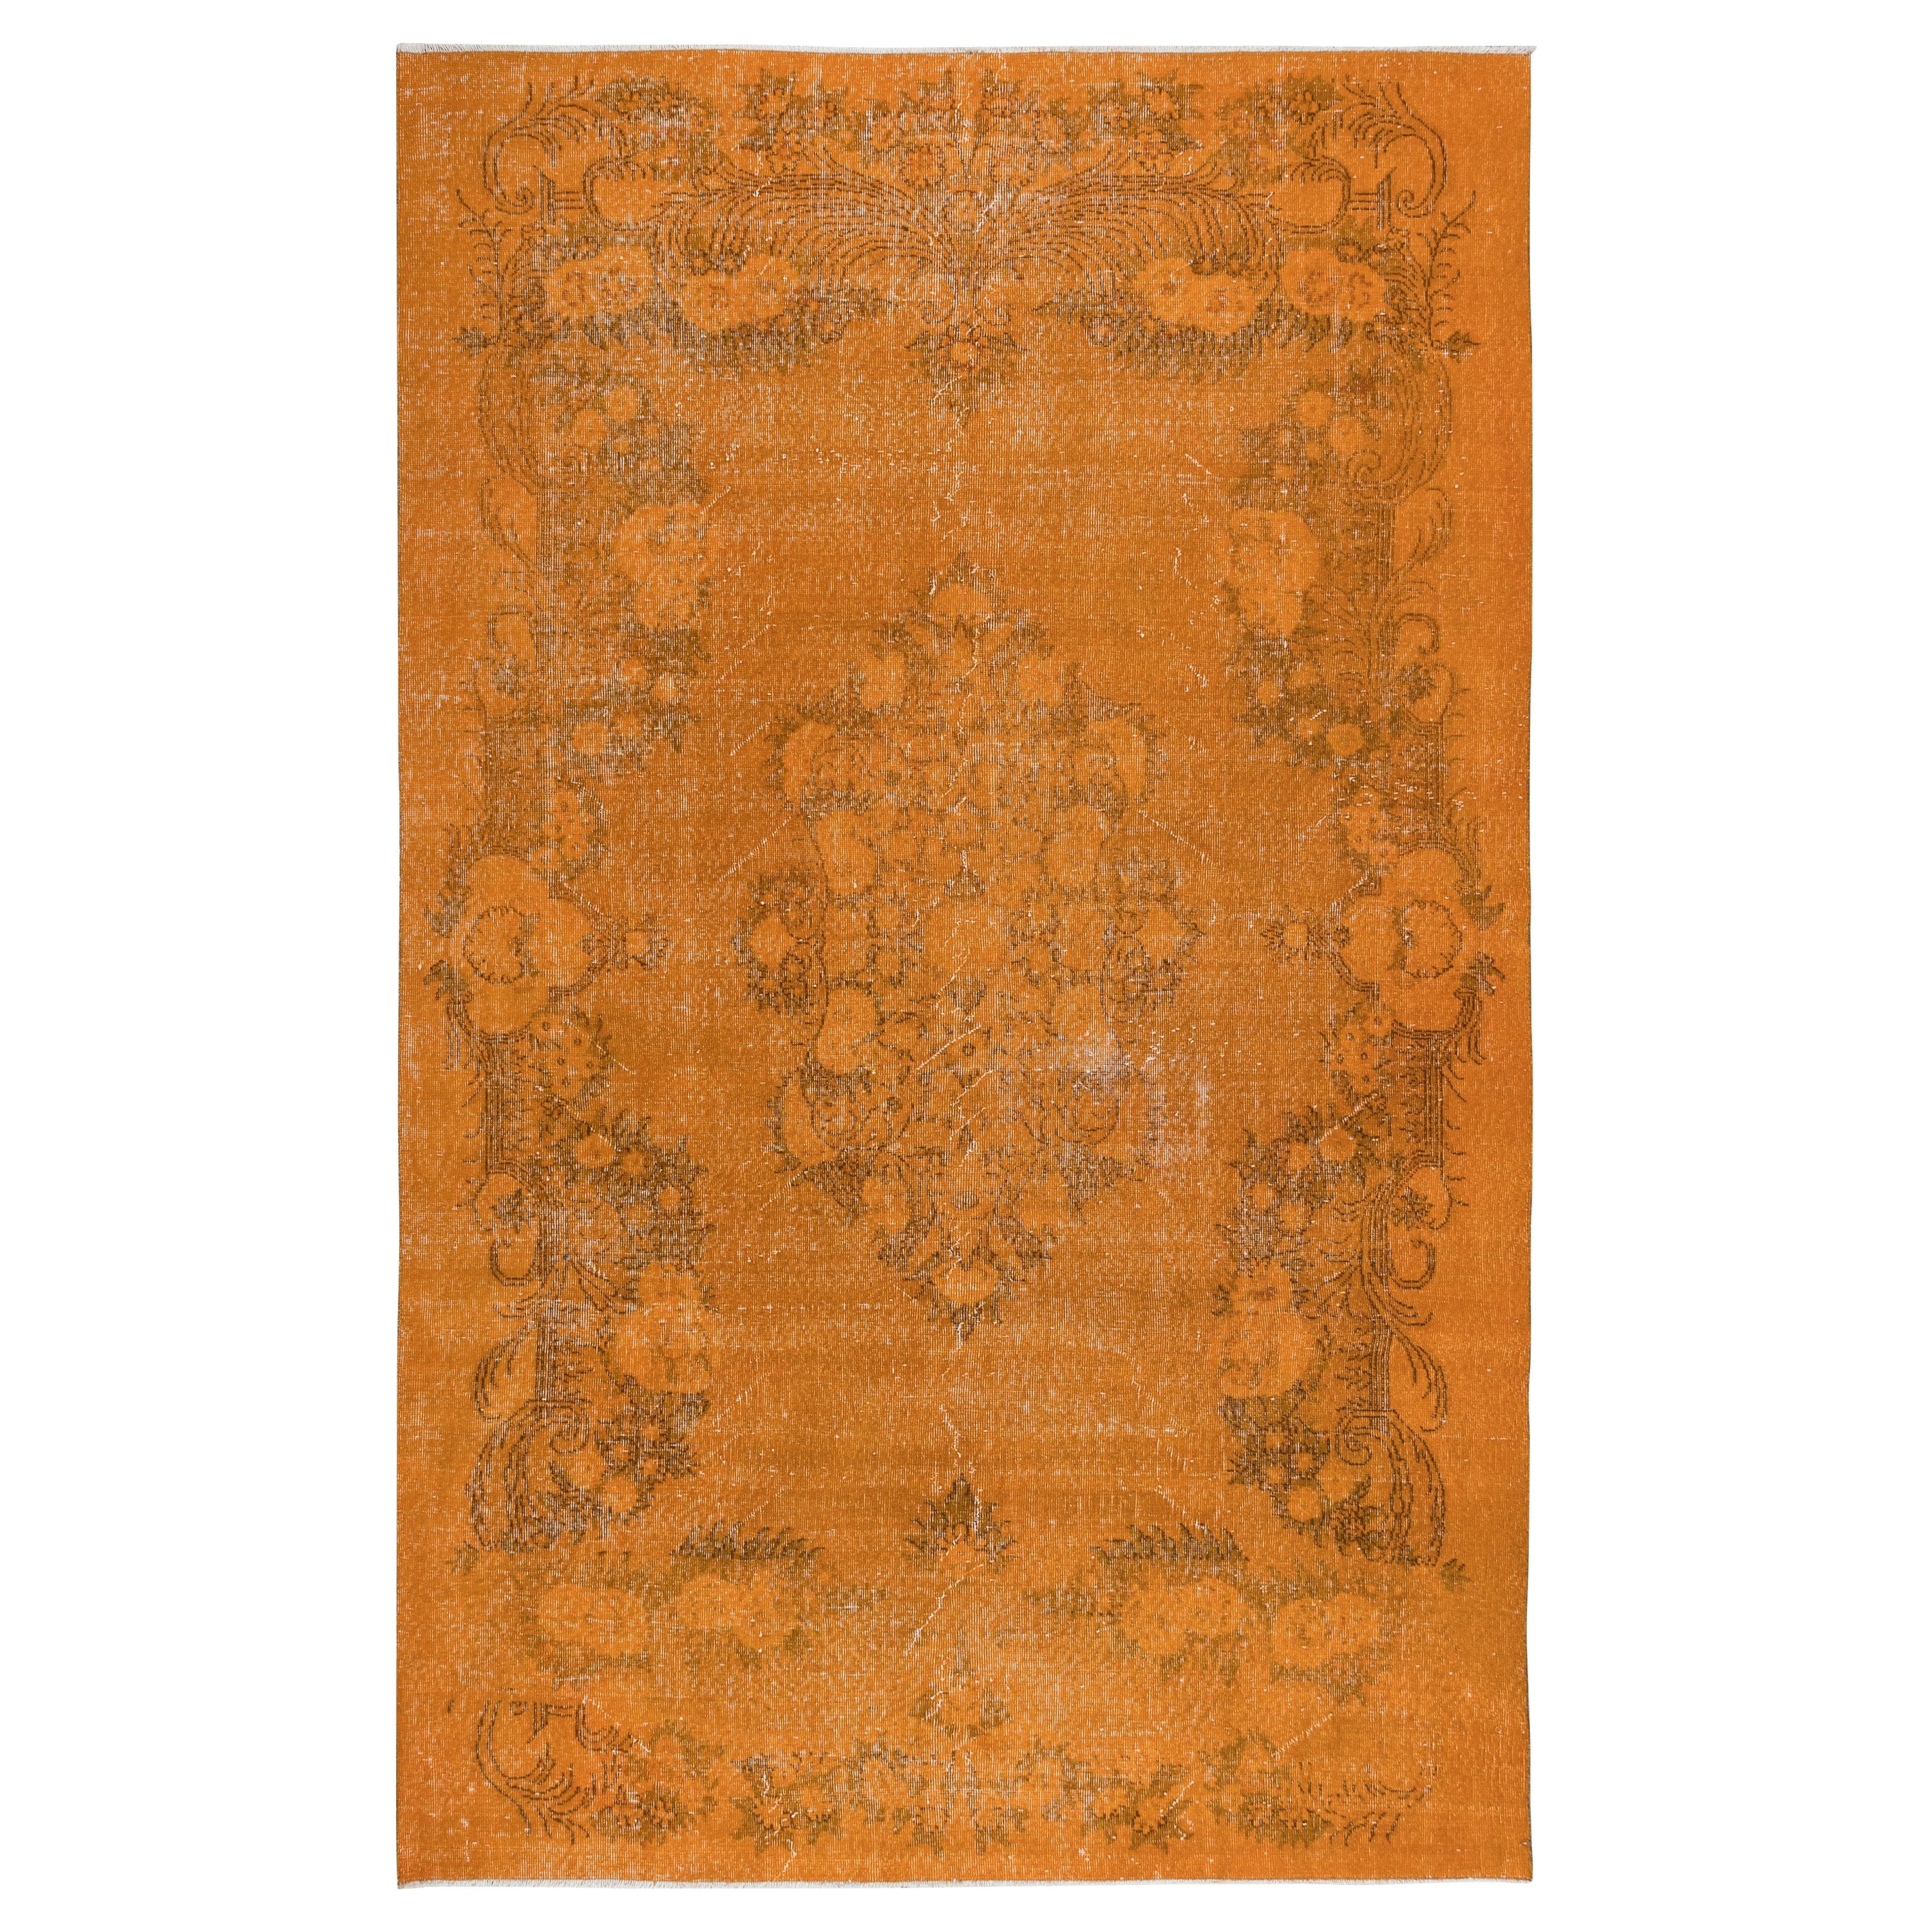 6.8x10.6 Ft One-of-a-kind Wool Area Rug in Orange, Handknotted in Turkey For Sale